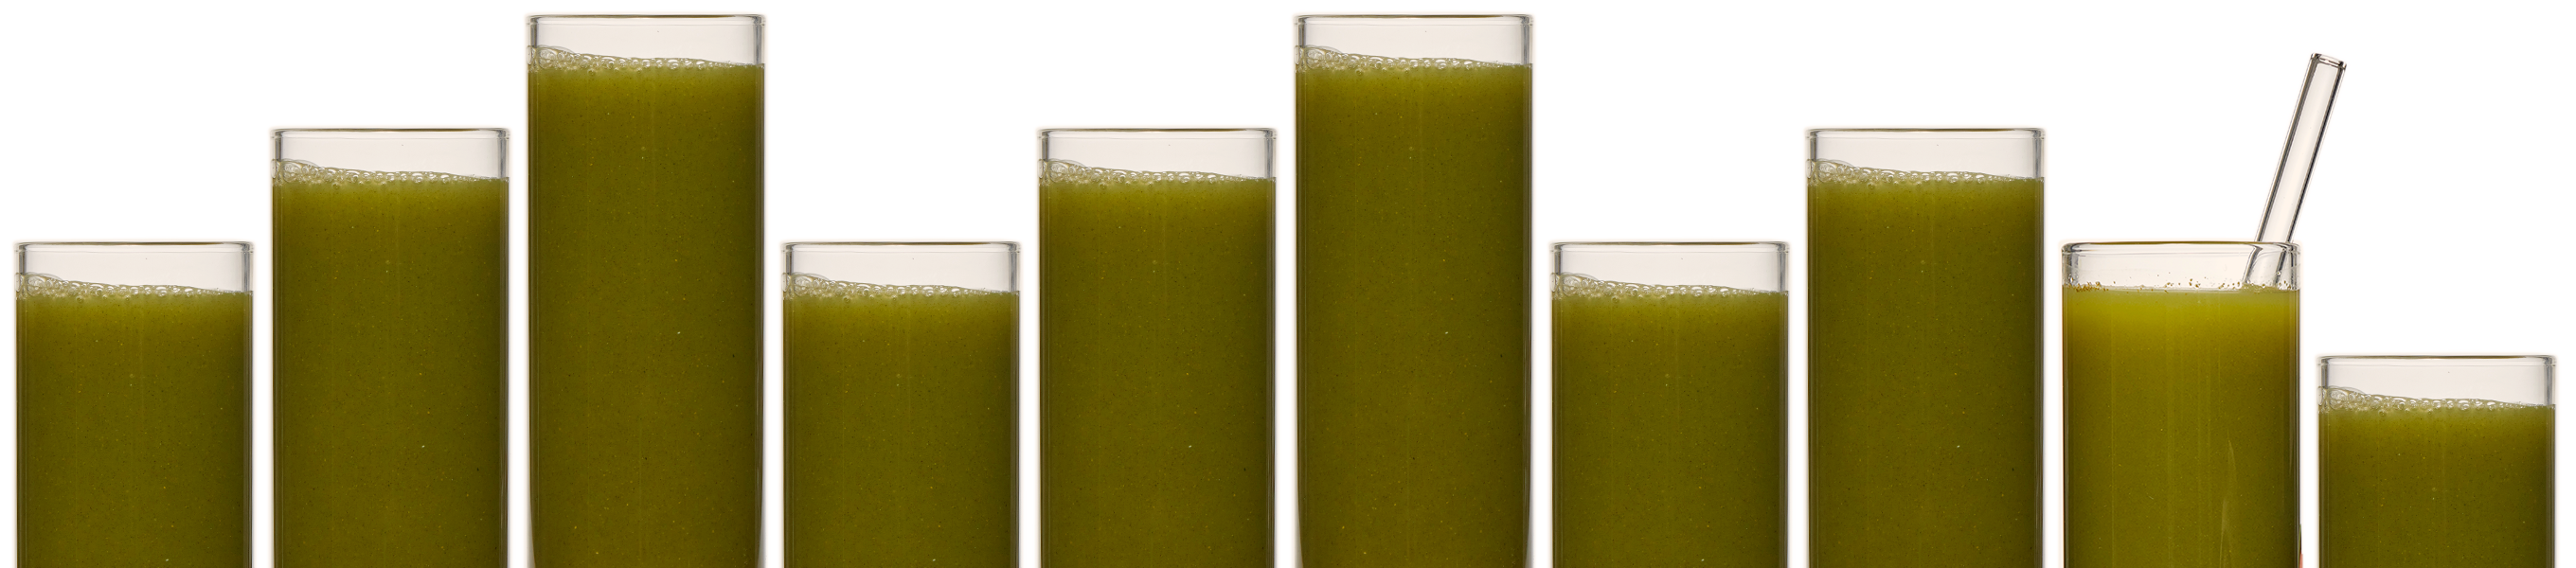 Many clear glasses of different heights filled with green juice. The second glass from the right has a glass drinking straw in it.